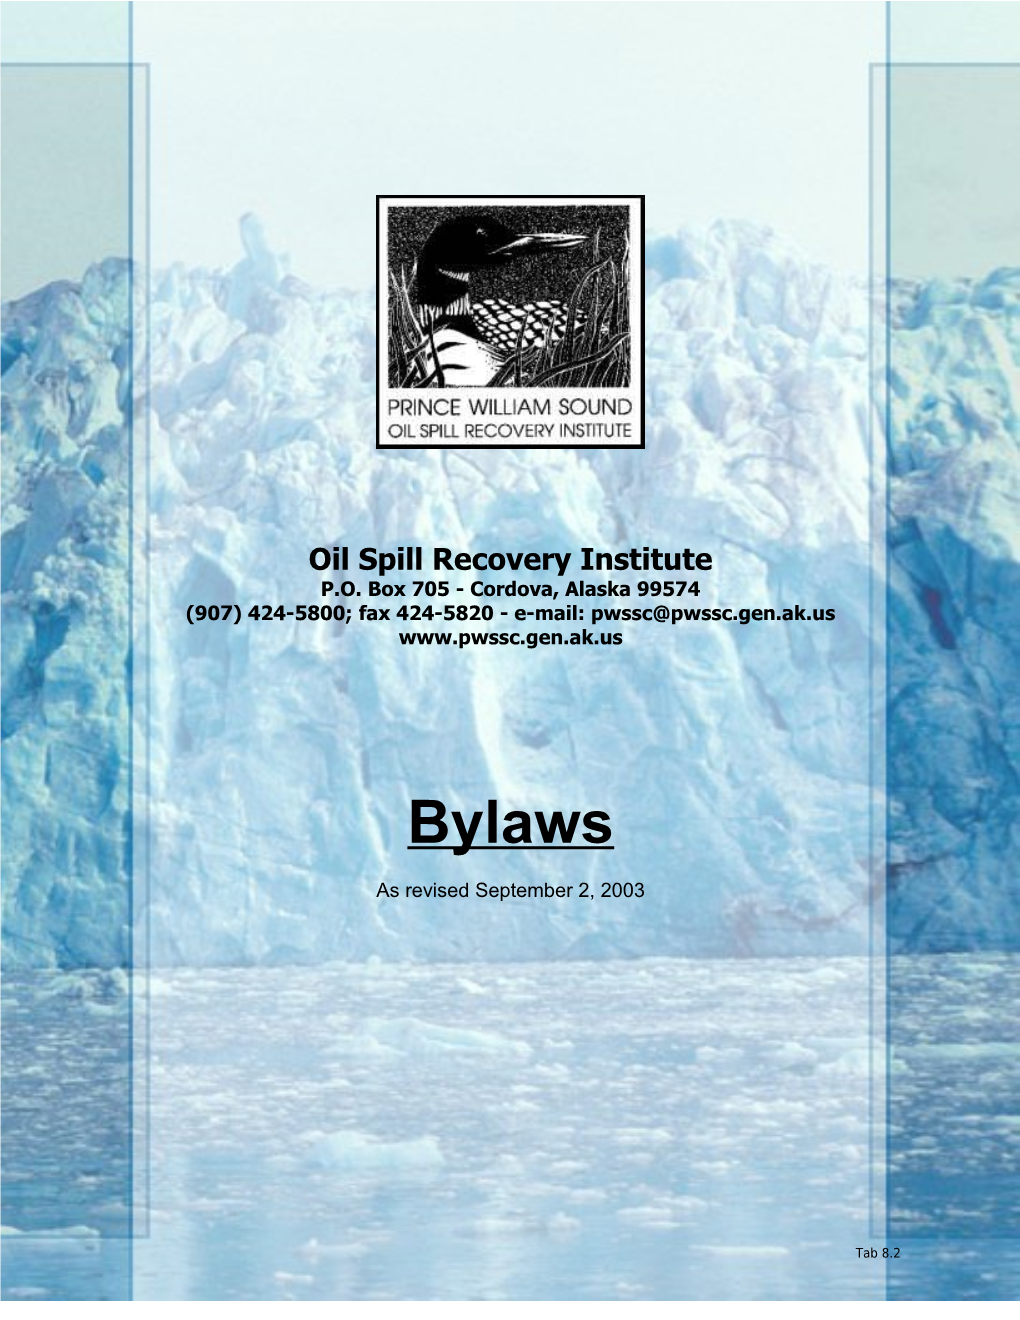 Oil Spill Recovery Institute